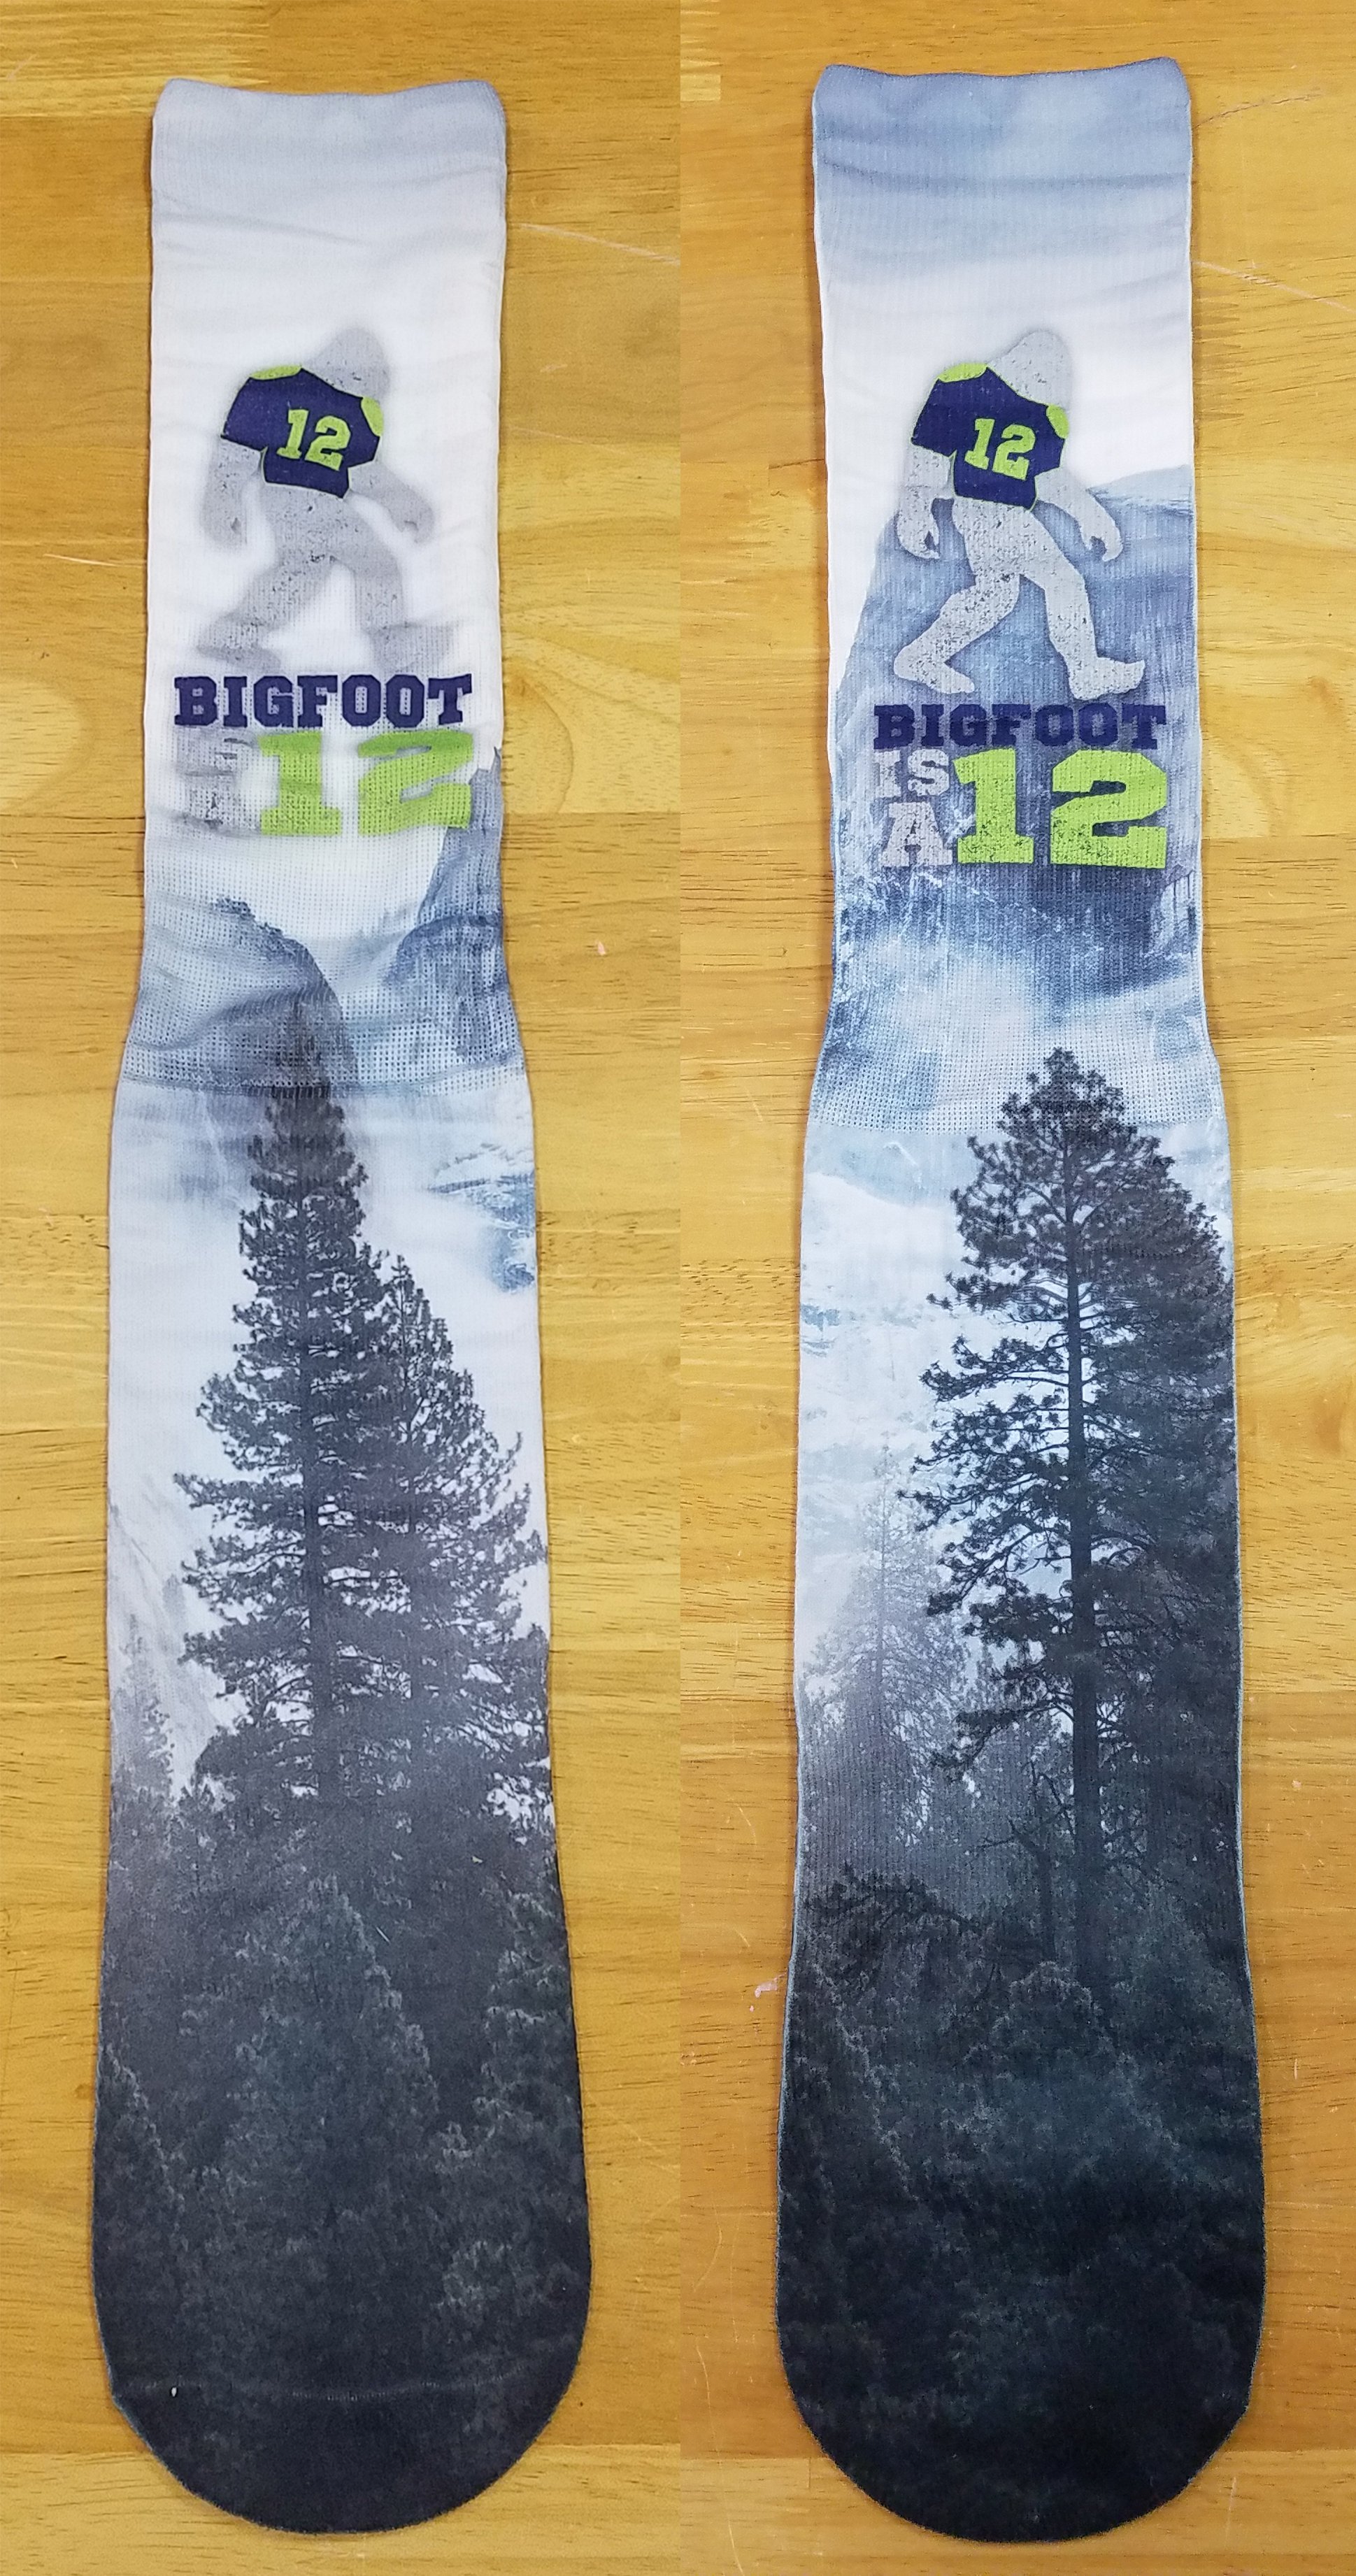 Bigfoot is a 12 made with sublimation printing